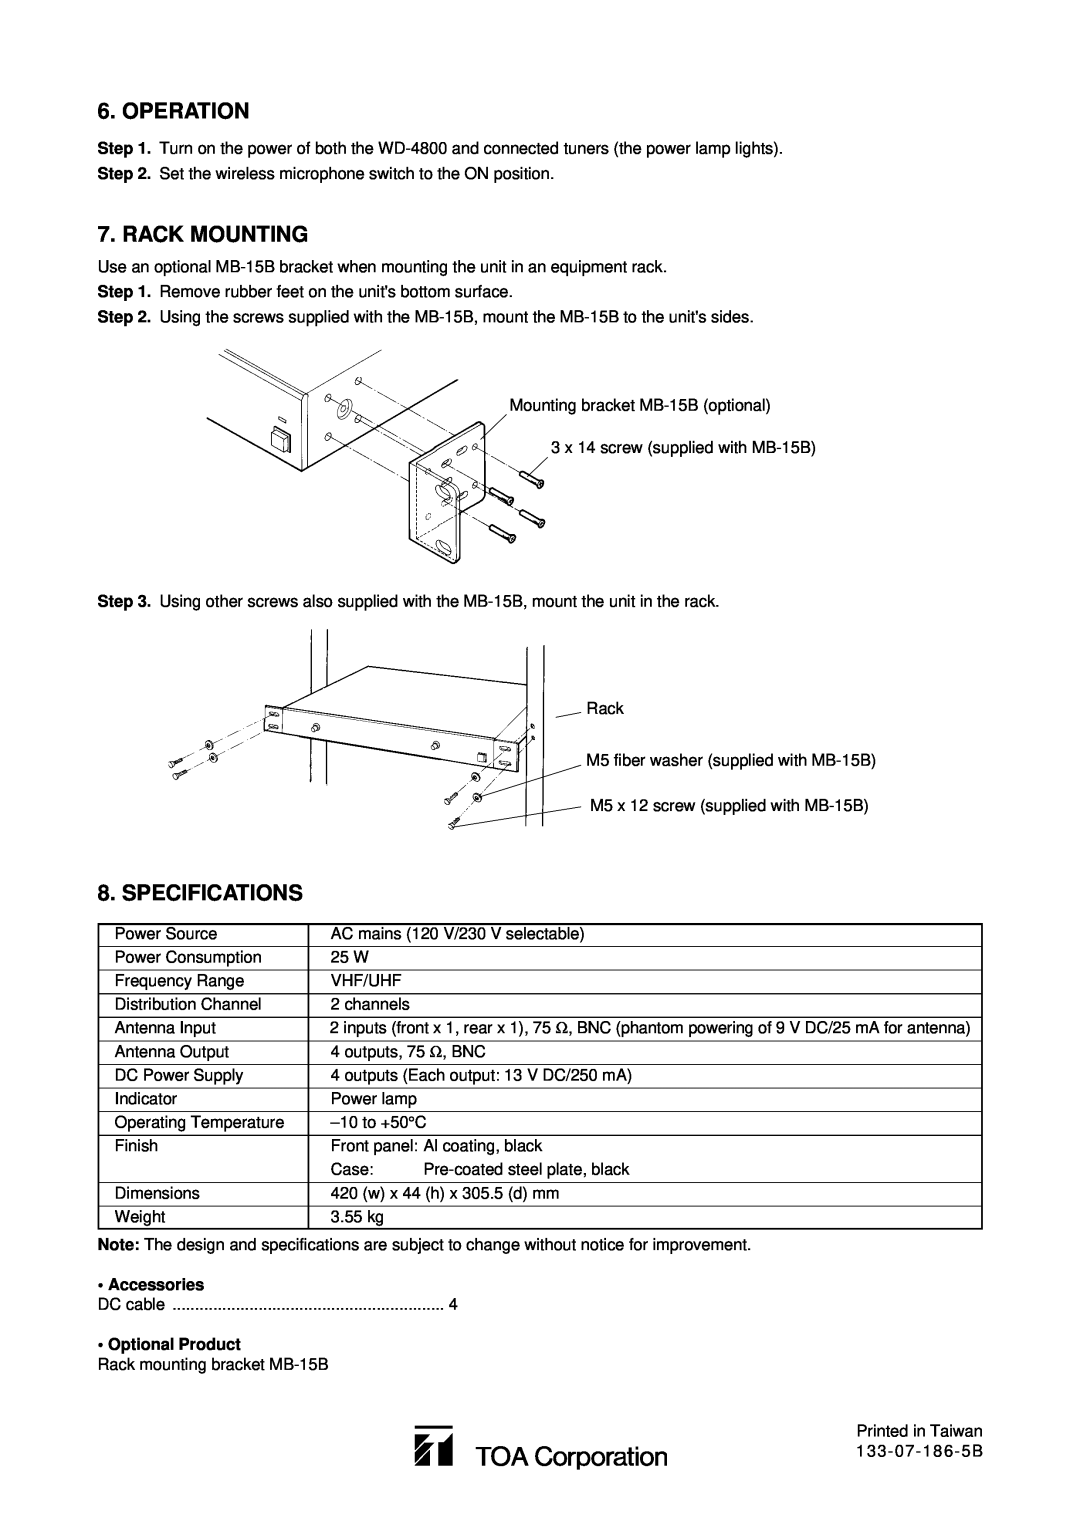 TOA Electronics WD-4800 instruction manual Operation, Rack Mounting, Specifications, Accessories, Optional Product 